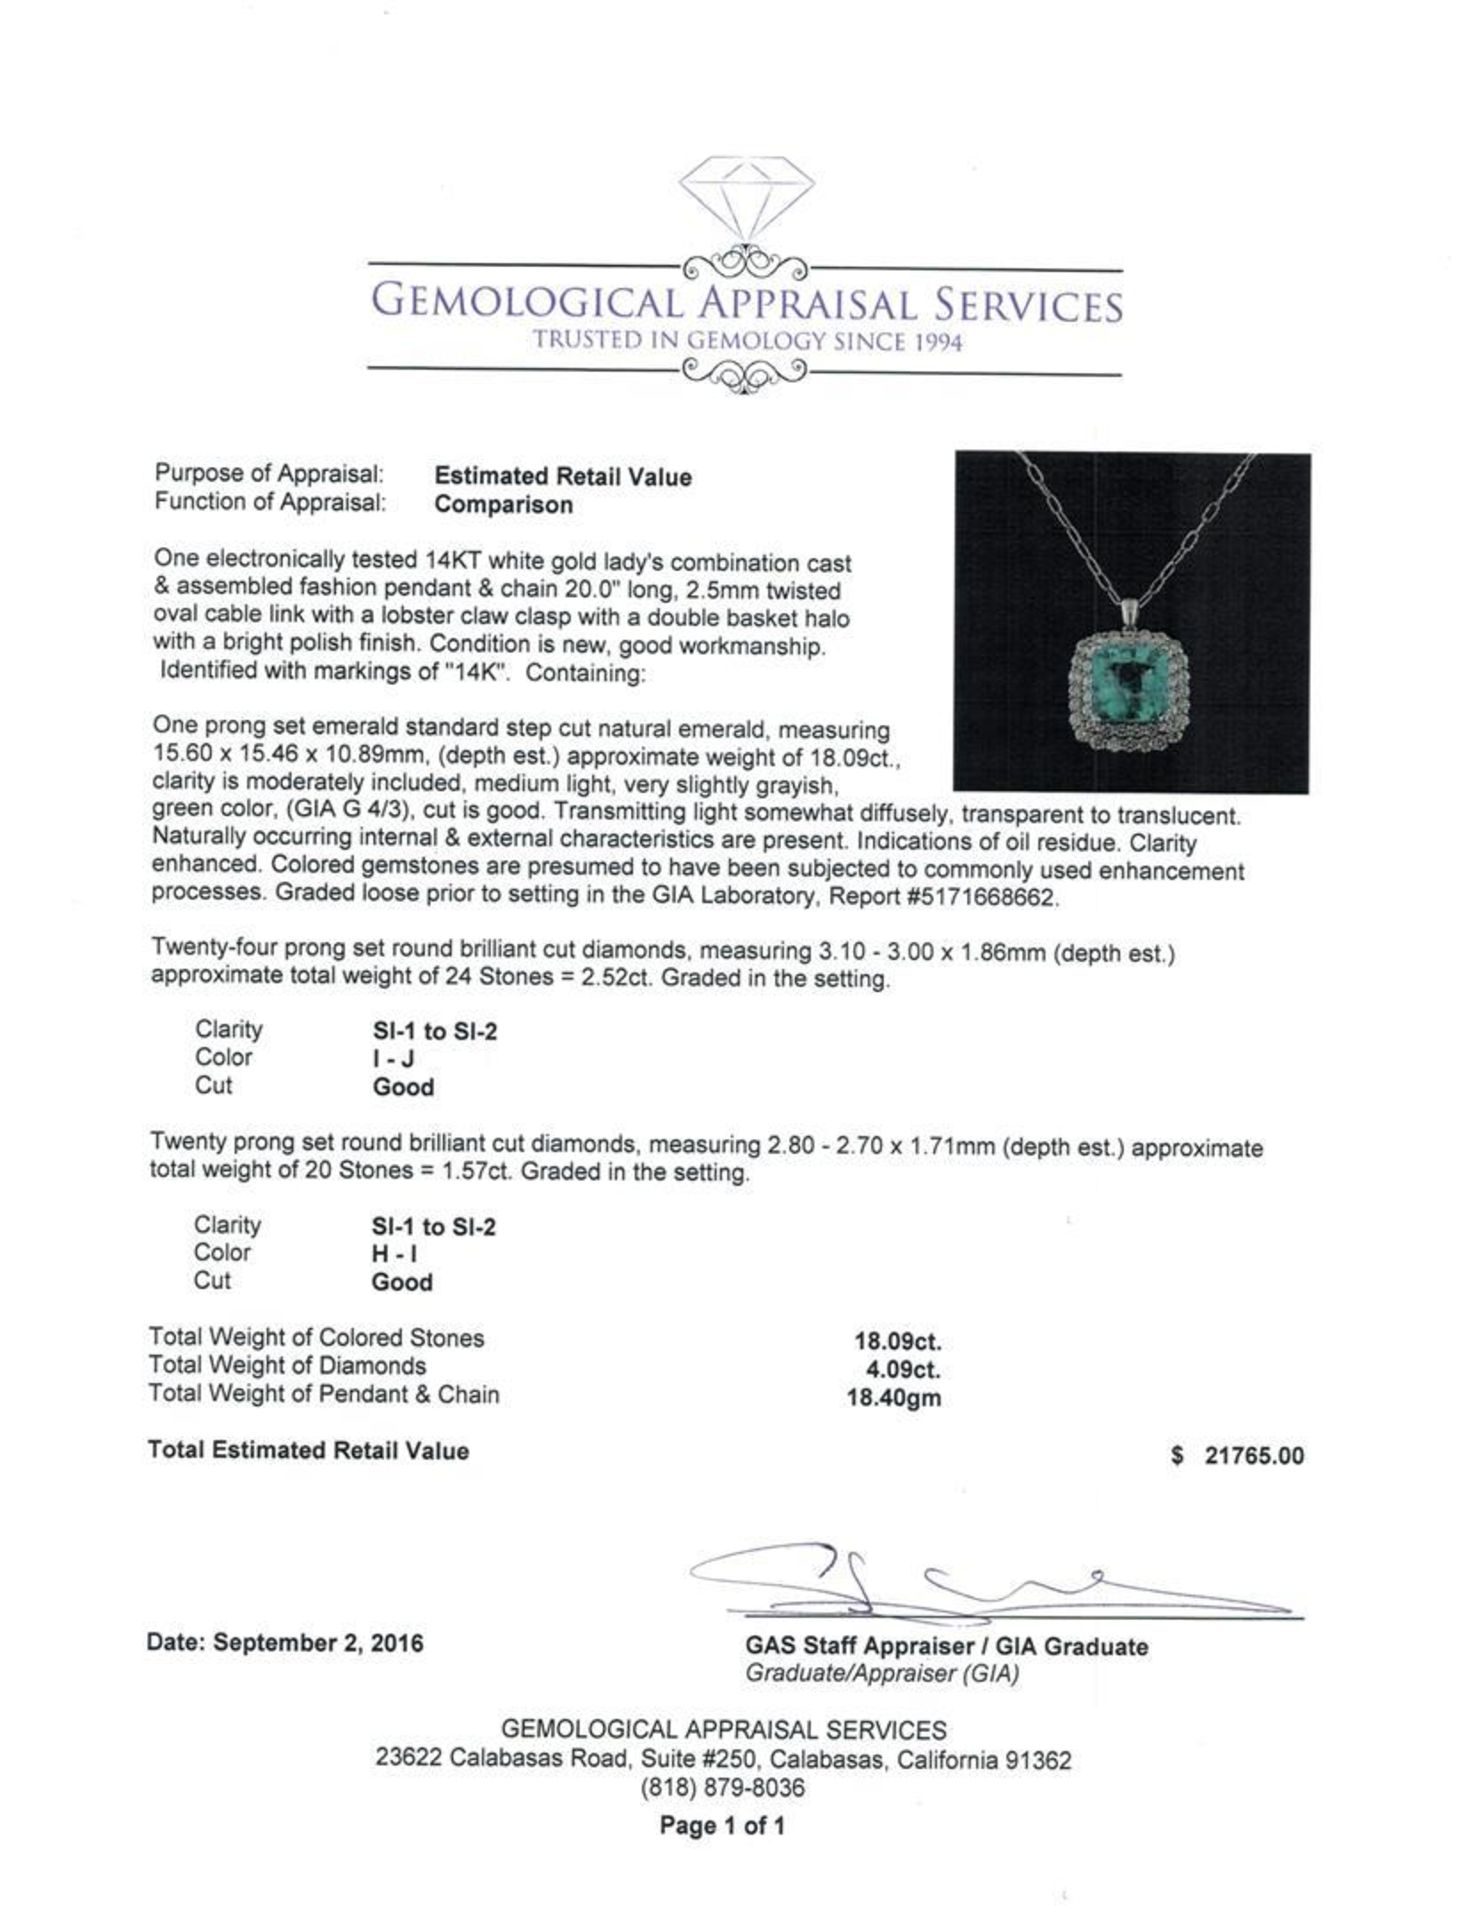 18.09 ctw Emerald and Diamond Pendant With Chain - 14KT White Gold - Image 3 of 4